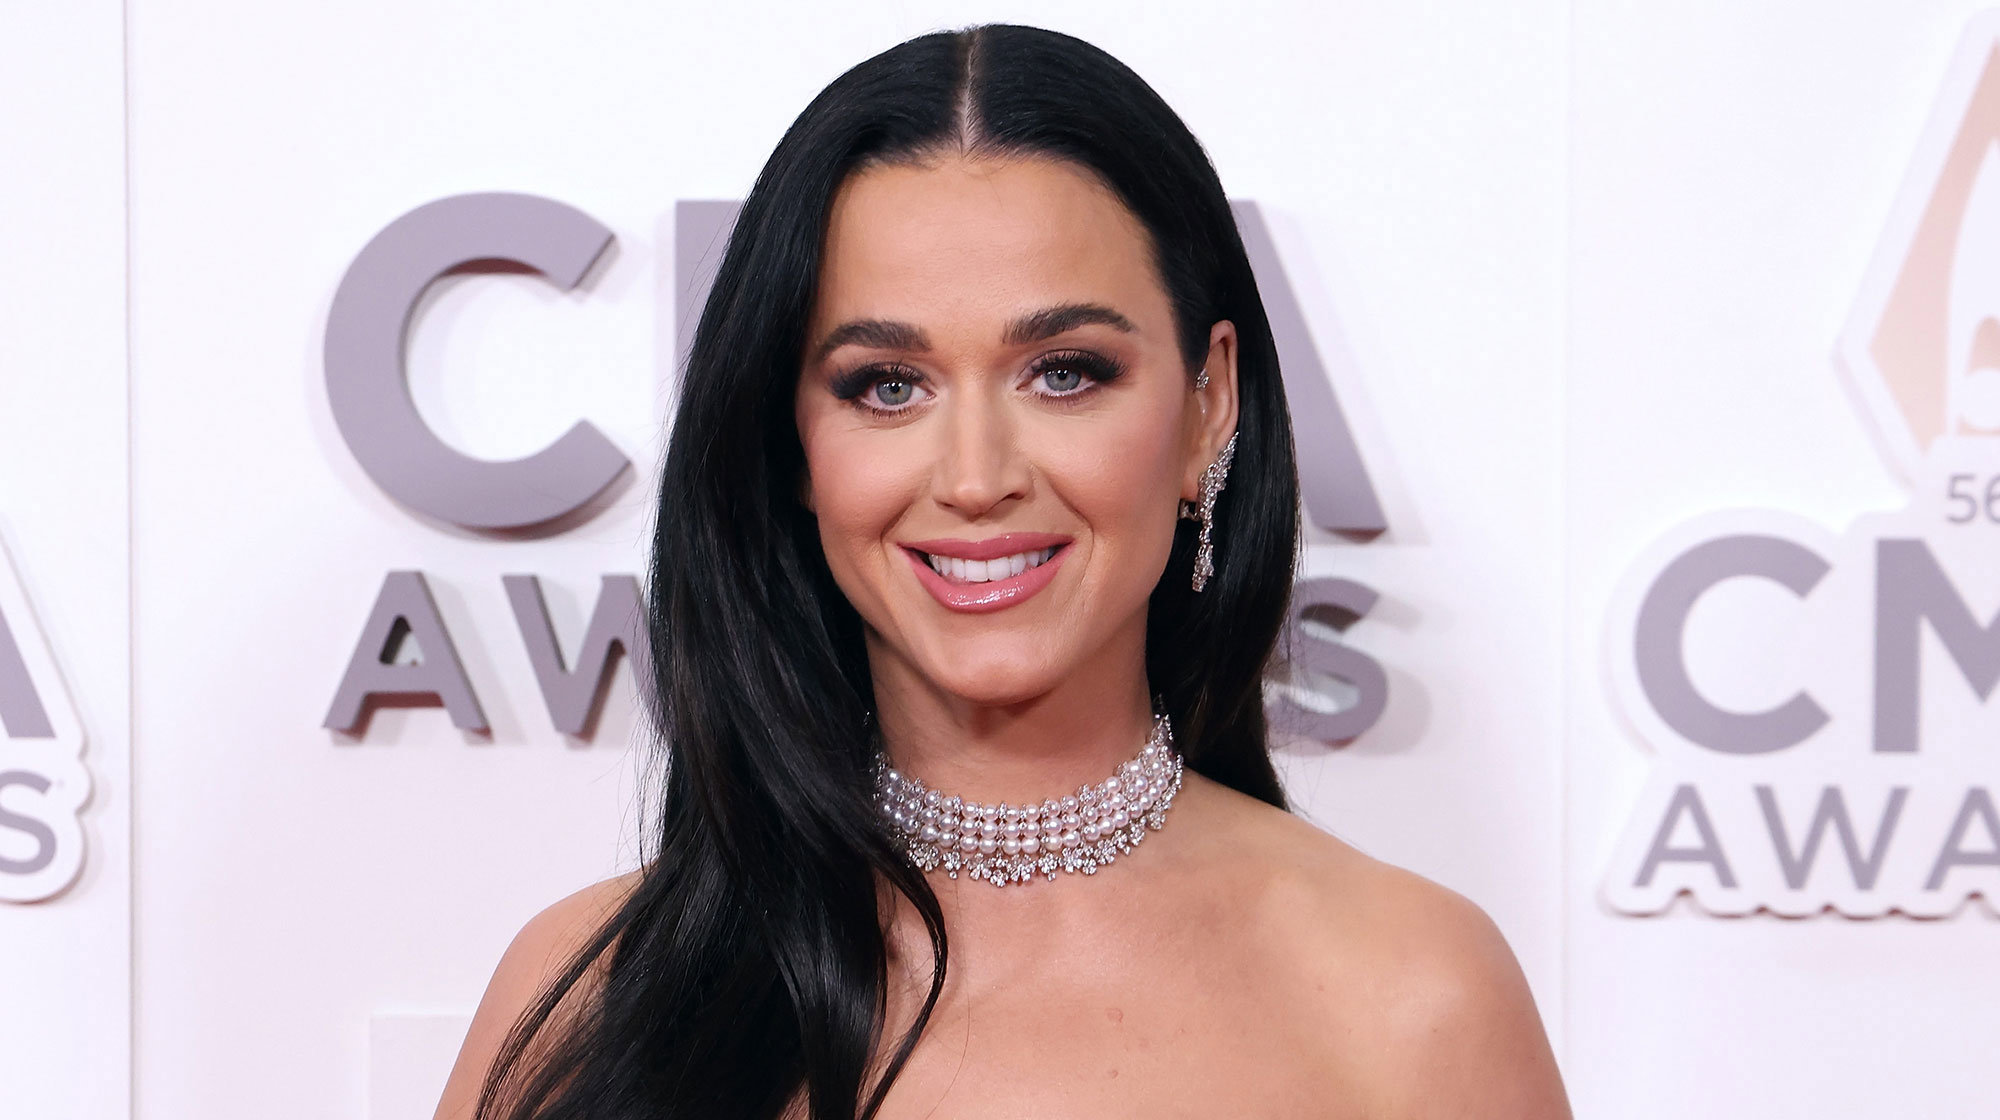 Katy Perry Will Make Her Debut on ‘Peppa Pig’ in Celebration of the ...